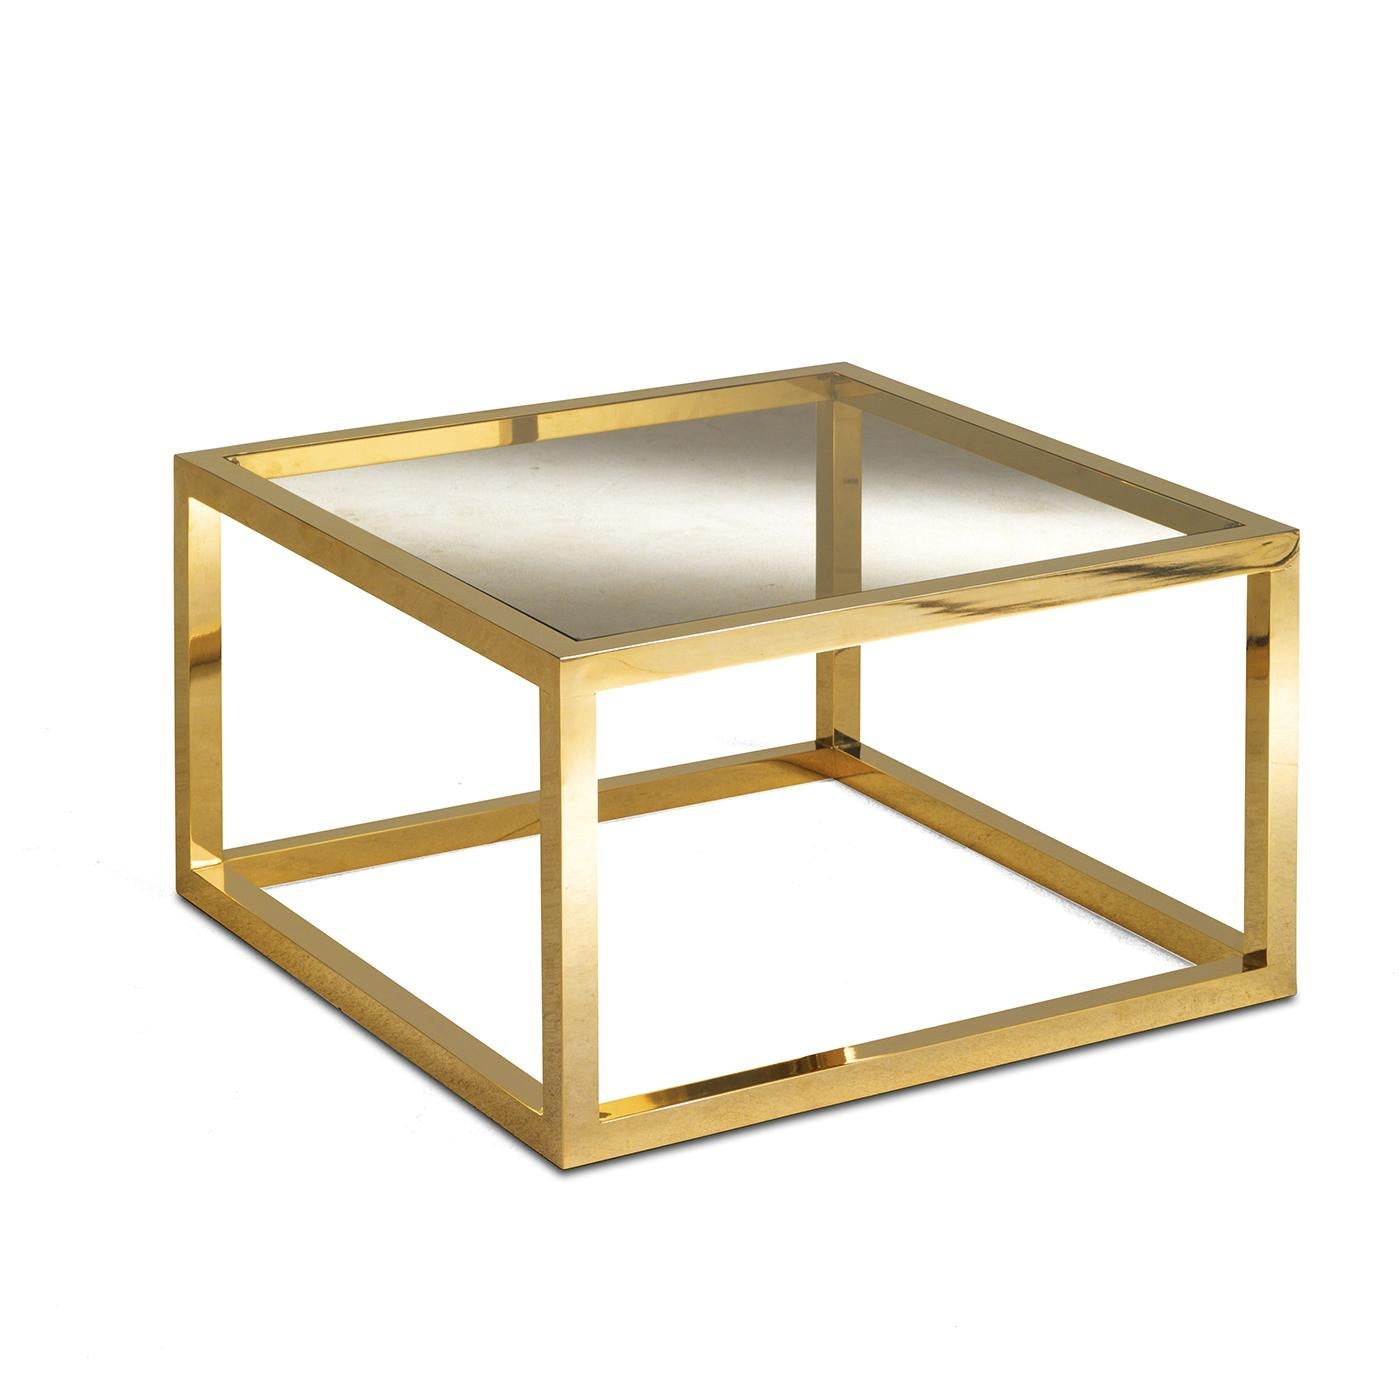 An exercise in elegant minimalism, this coffee table has a square base from which four short legs stem to support a square top. The entire structure is in brass, while the top is made of glass with a bronzed finish. Simple and sophisticated, this